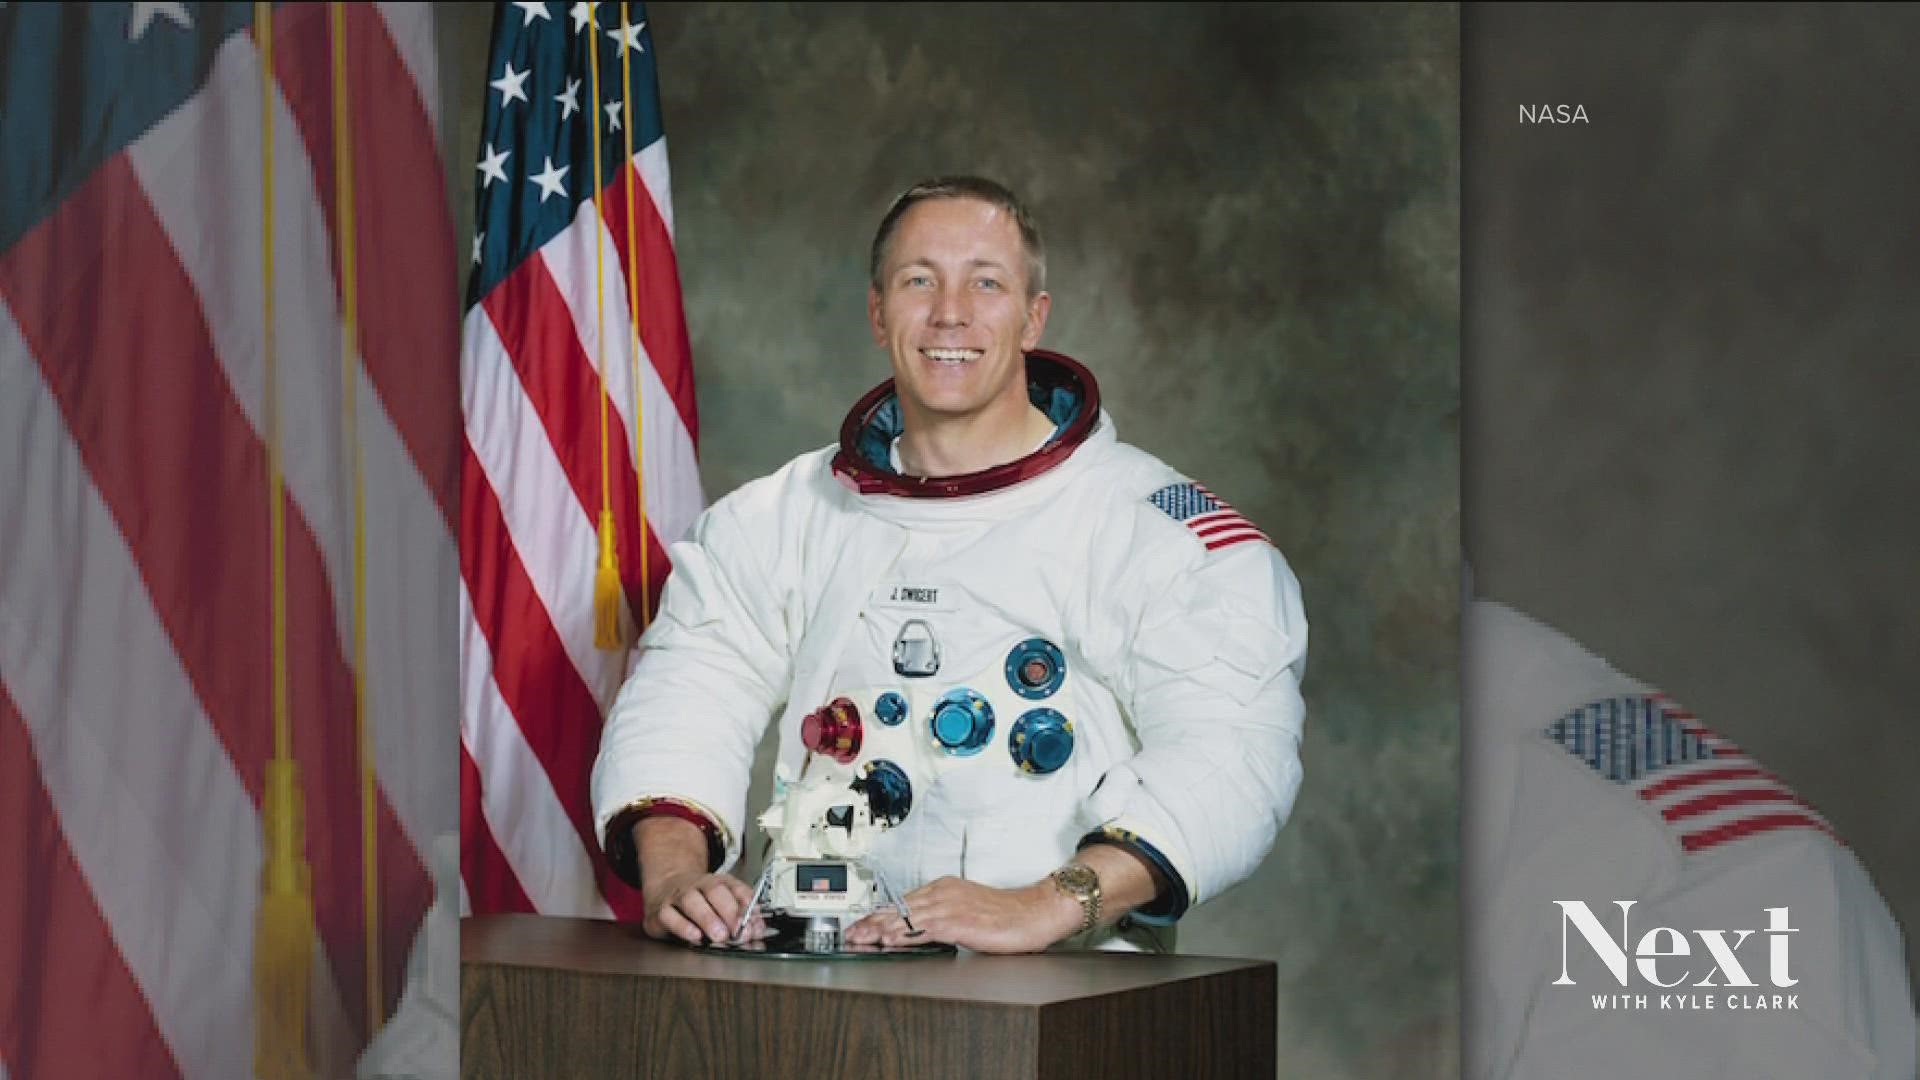 Tom Hanks turned the line into a cultural phenomenon, but Denver native John "Jack" Swigert Jr. was the astronaut who alerted NASA to a problem on Apollo 13.